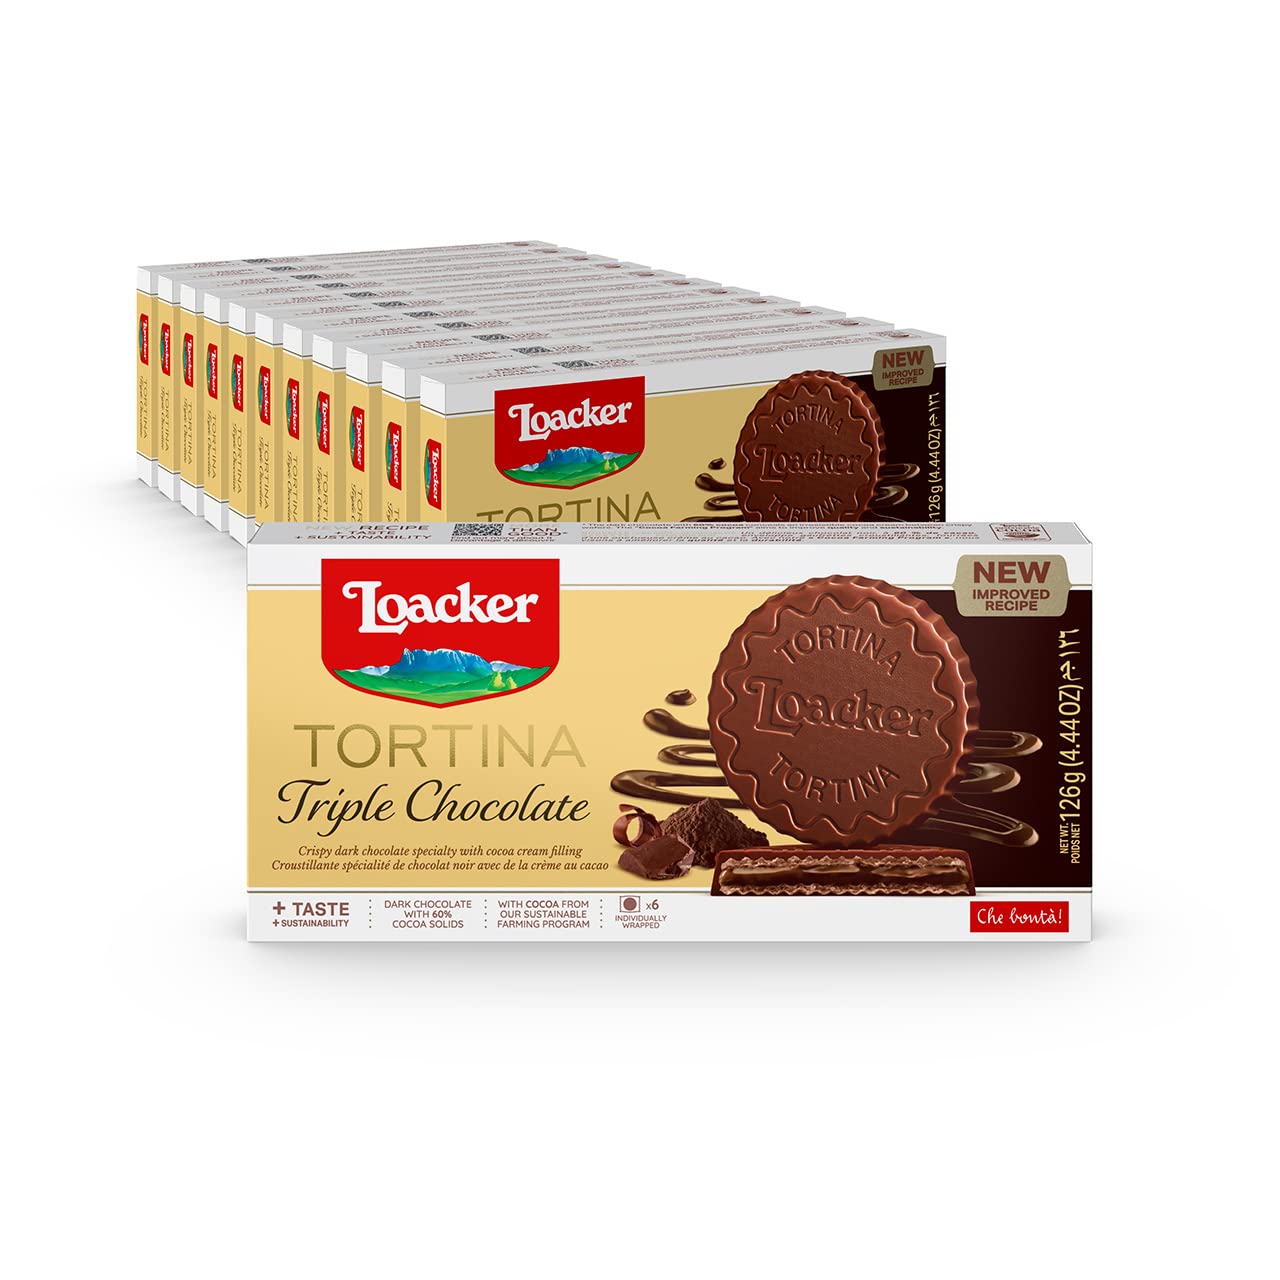 YMMV Loacker Tortina Triple Chocolate - Individually Wrapped Premium Dark Chocolate Enrobed Crispy Cocoa Wafer Tartlets with Cocoa Cream Filling - Pack of 12 - $20.24